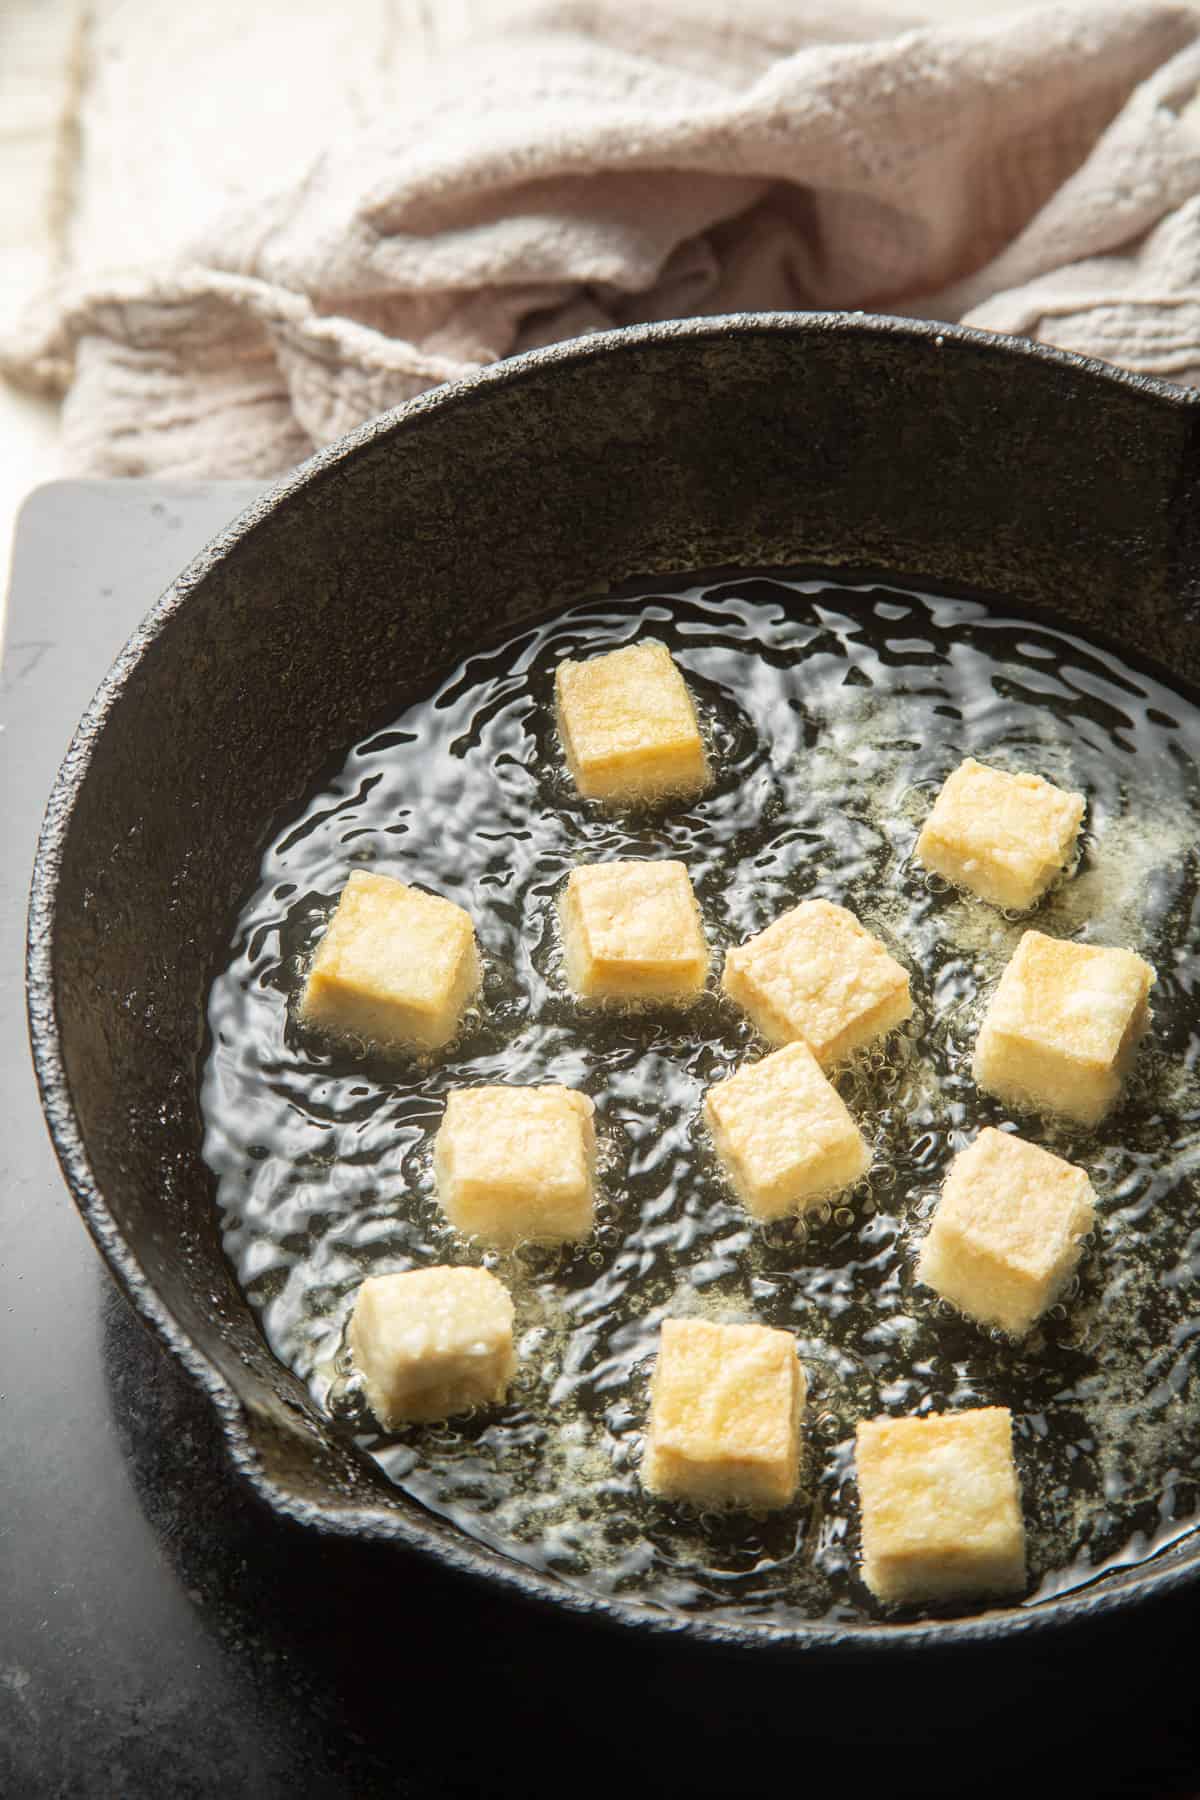 Tofu cubes frying in a skillet.